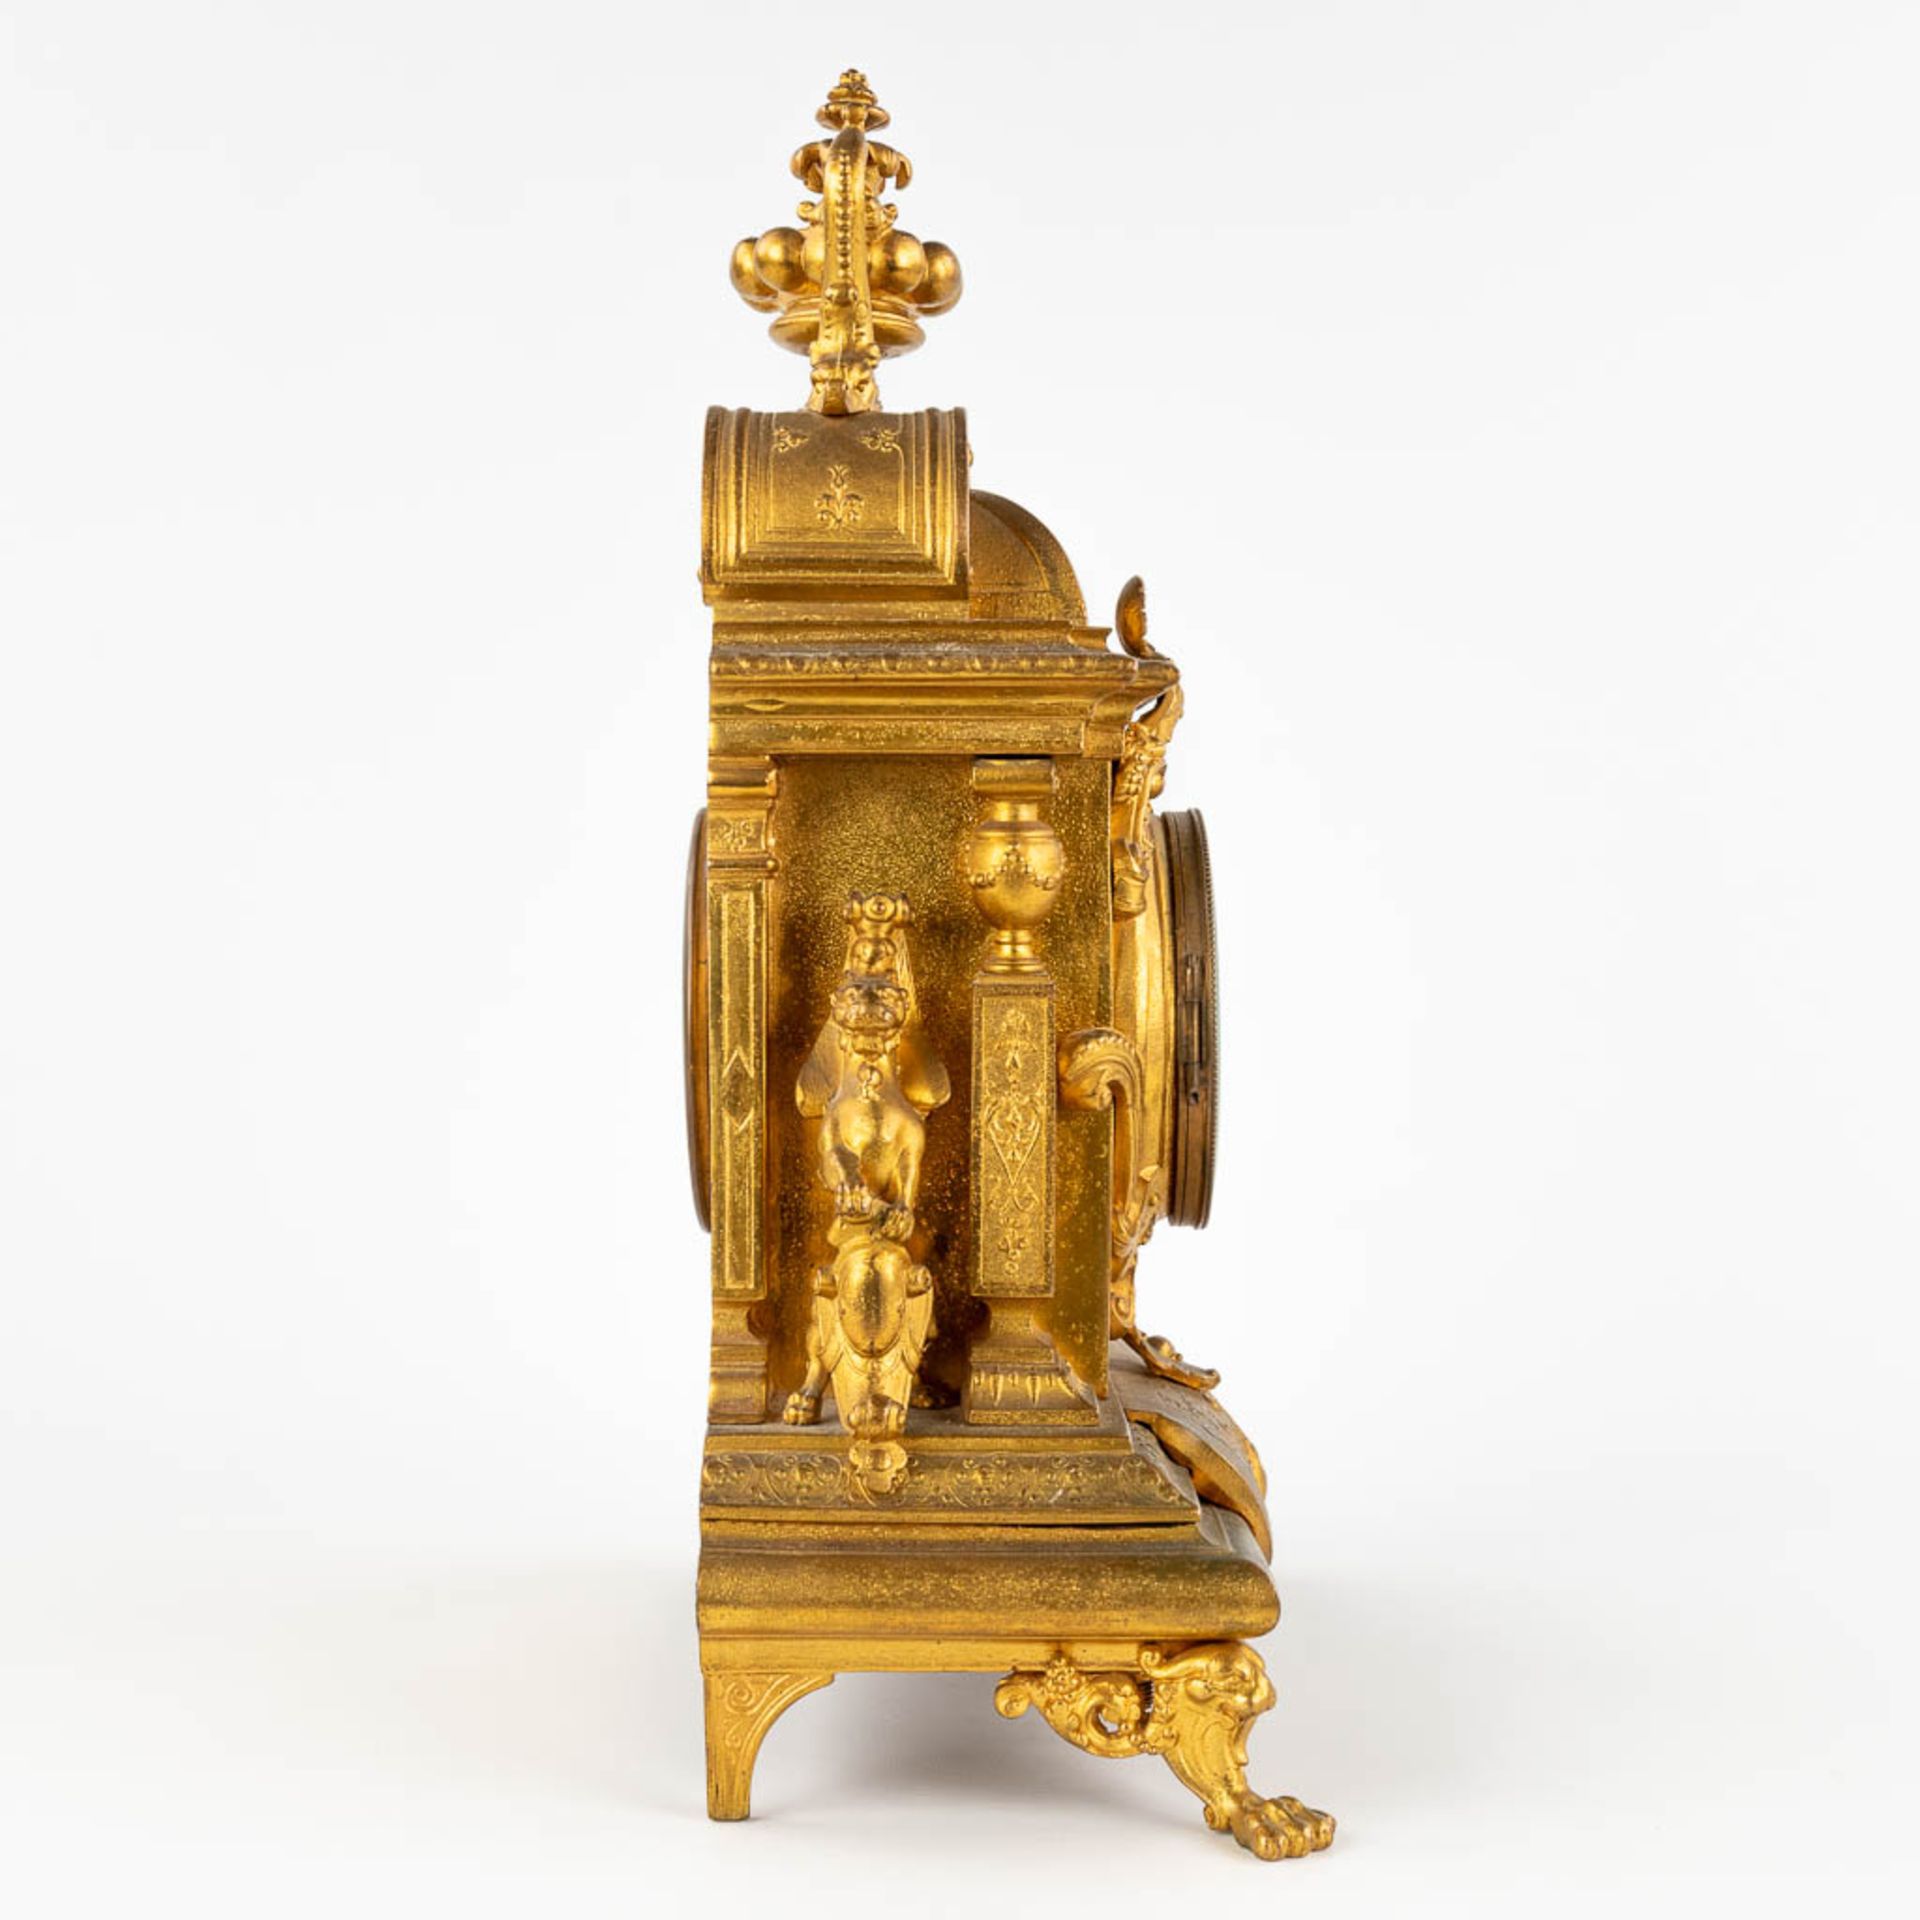 A mantle clock, Neoclassical style, gilt spelter. 19th C. (D:13 x W:27 x H:40 cm) - Image 5 of 13